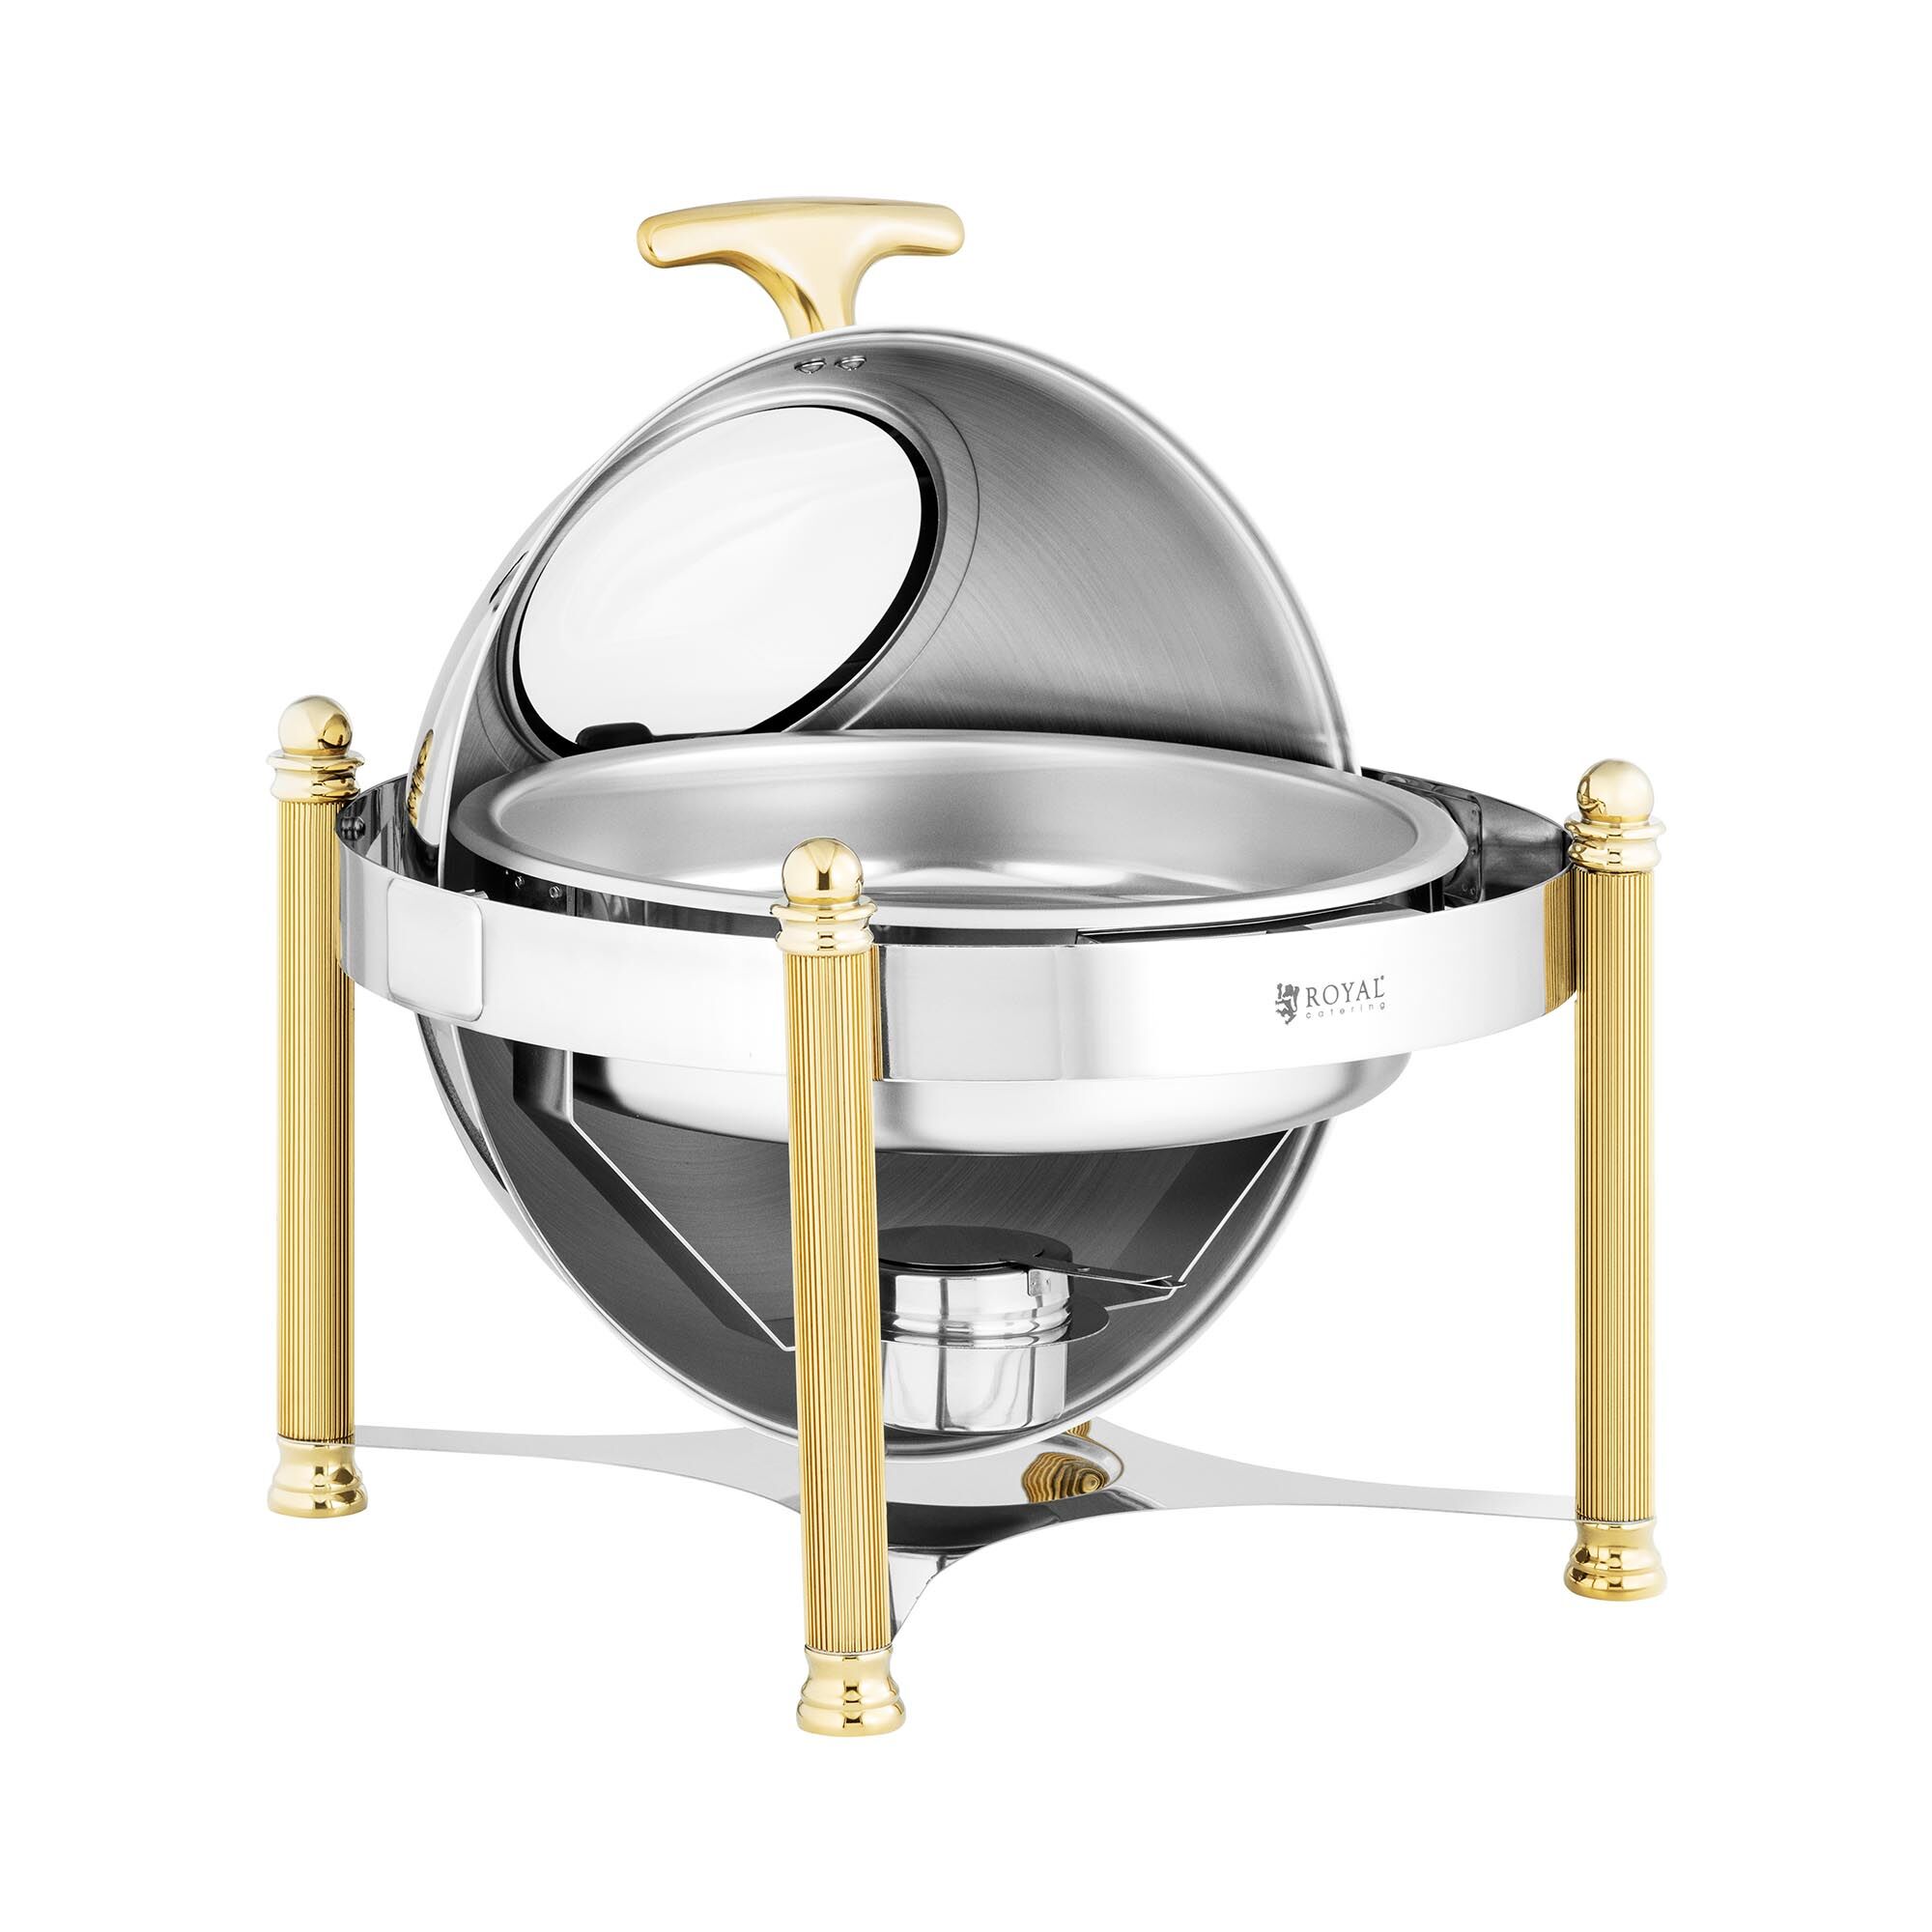 Royal Catering Chafing Dish - rund - Goldakzente - Rolltop-Haube - 6 L - Royal Catering